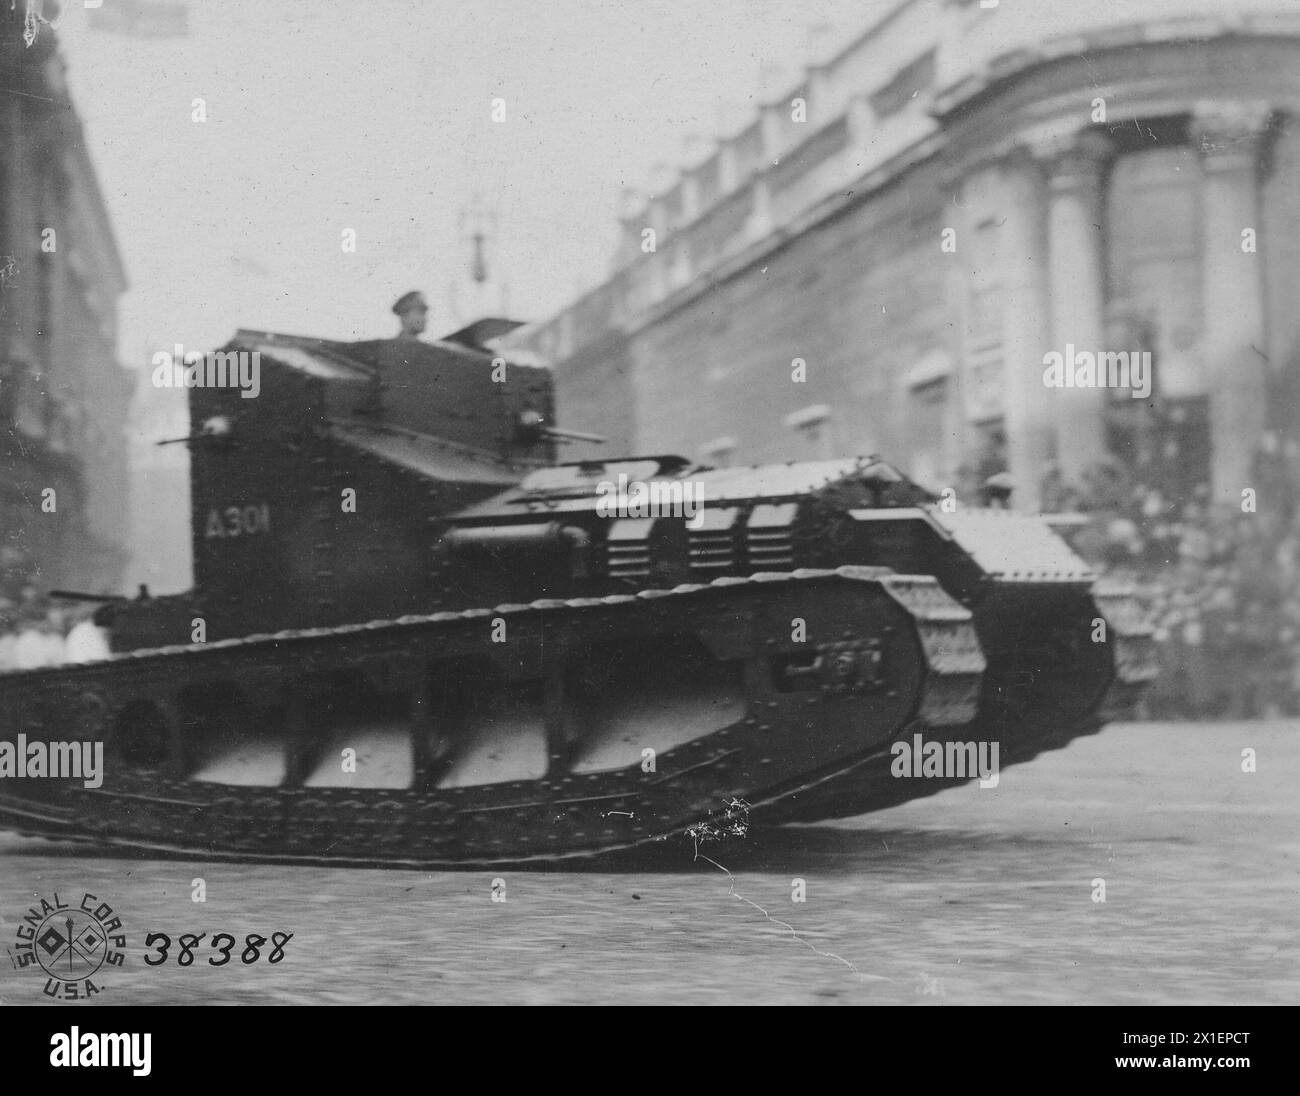 Image of a Whippet tank during the Lord Mayor's show in London England ca. 1918 Stock Photo